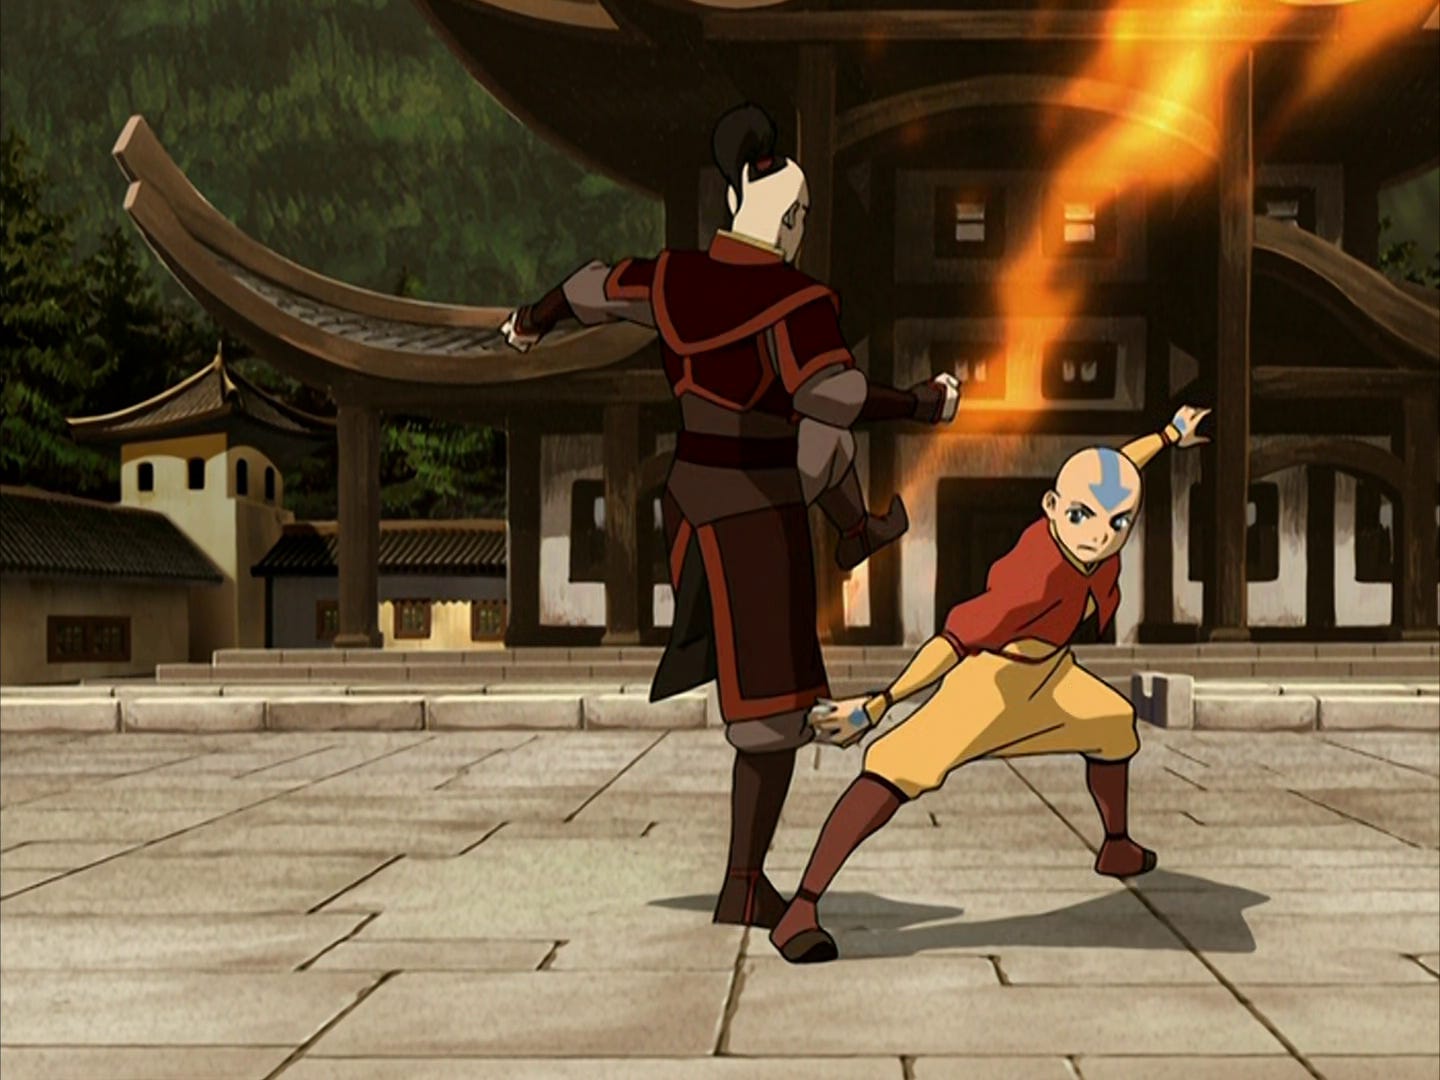 Aang and Zuko are locked in a close exchange. Zuko kicks fire at Aang, while Aang maneuvers around Zuko to avoid it.